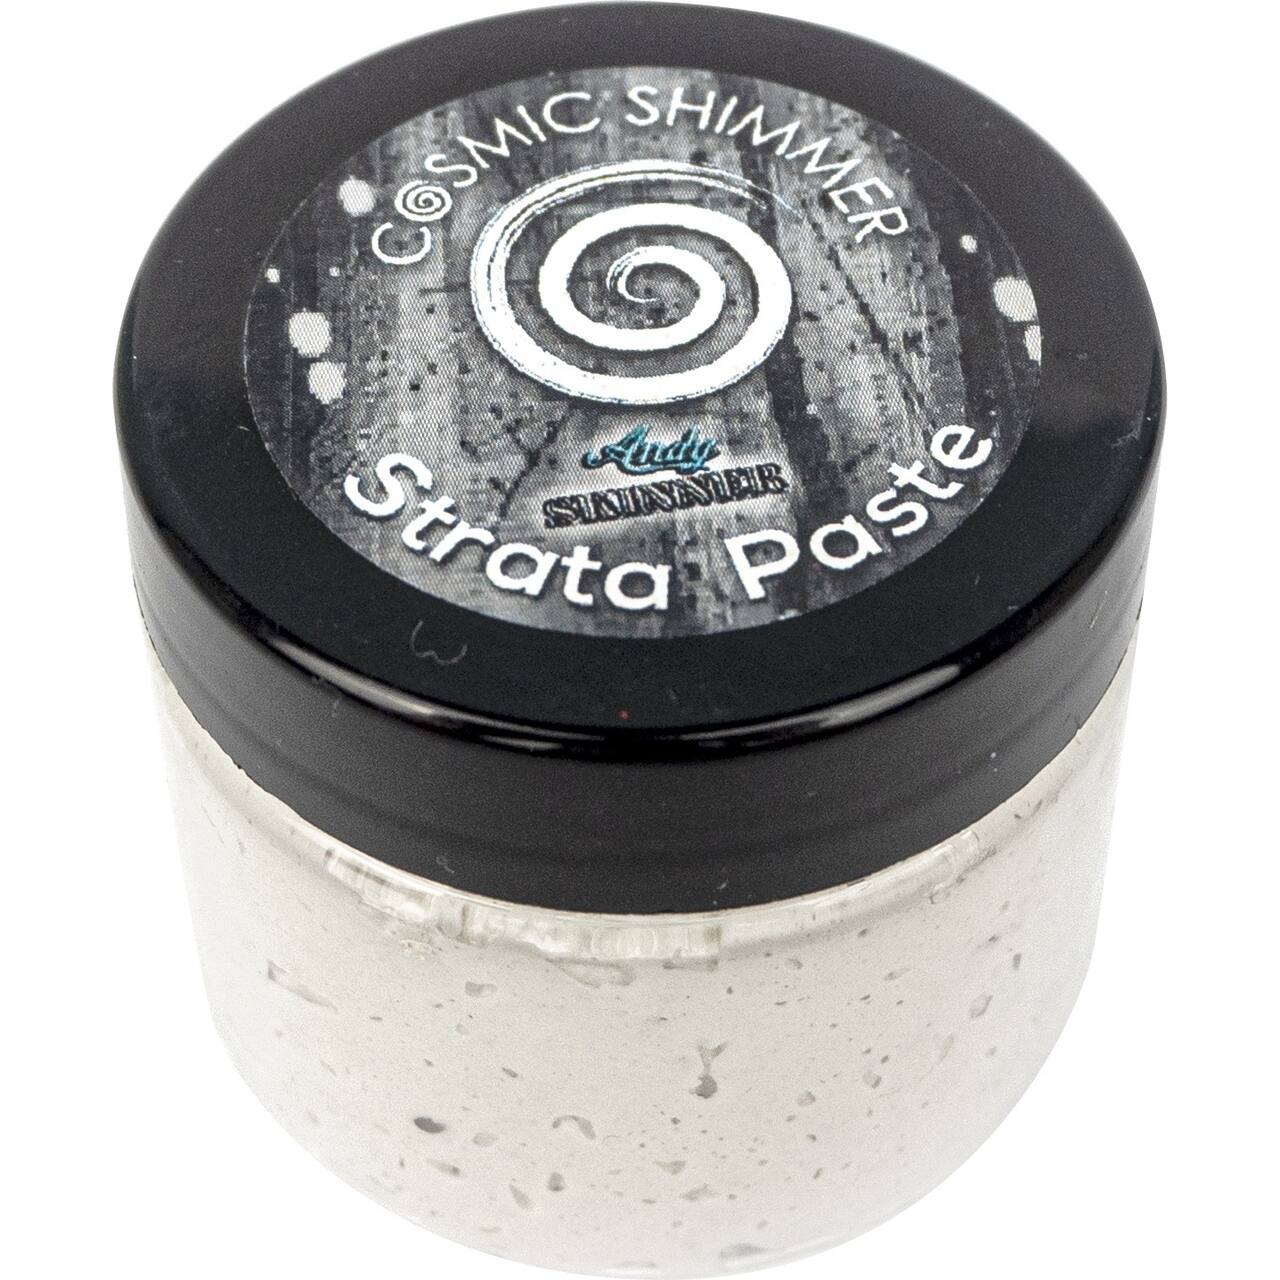 Creative Expressions Cosmic Shimmer Strata Paste